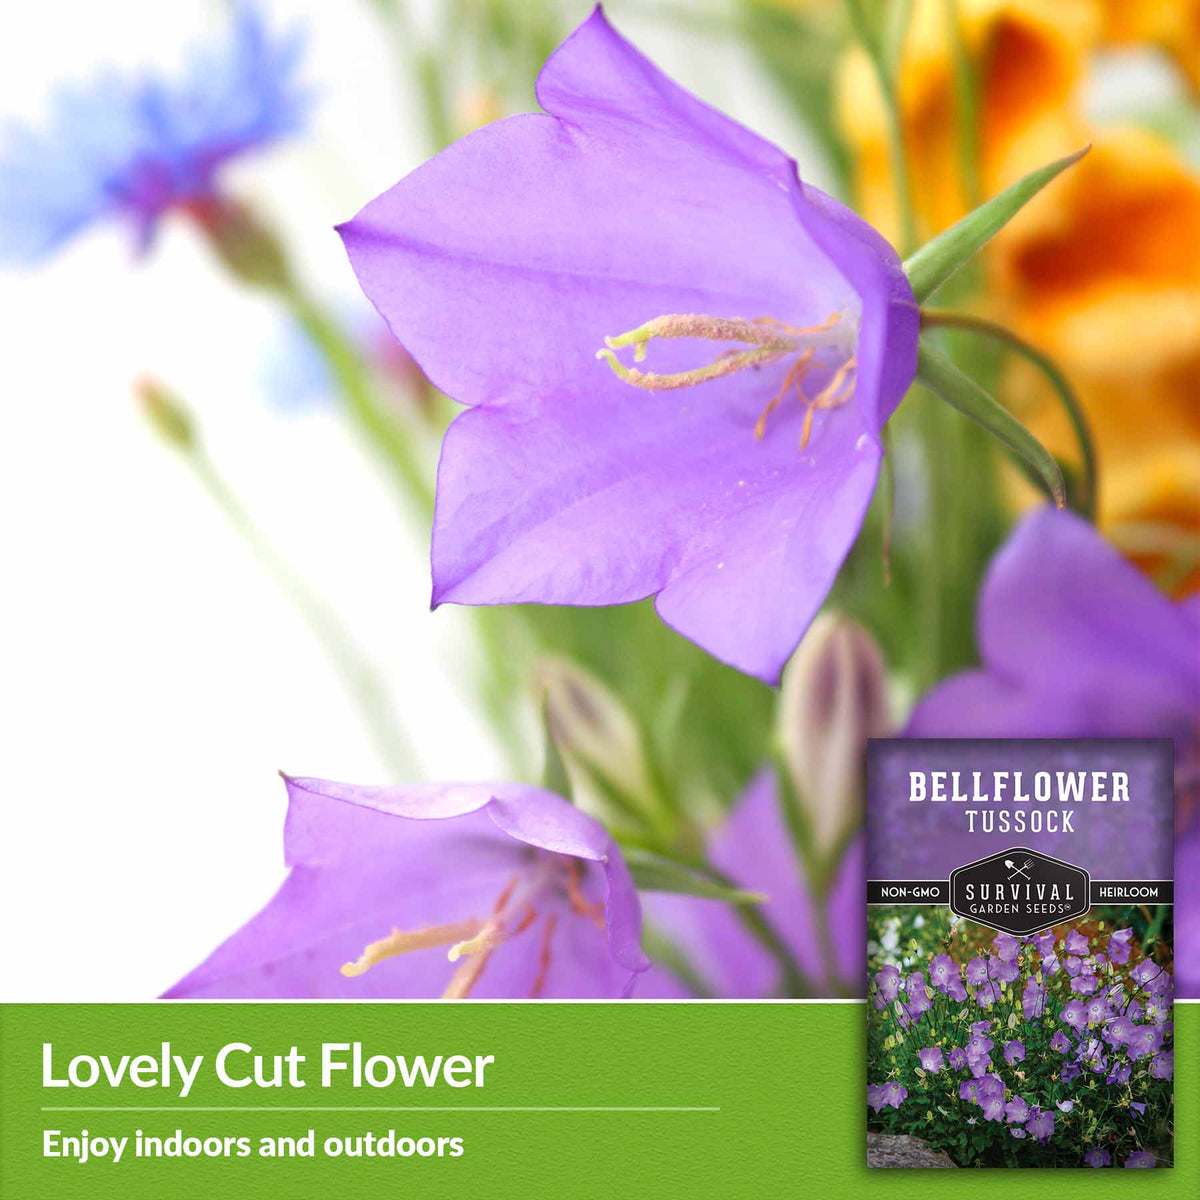 Lovely cut flower - enjoy indoors and outdoors